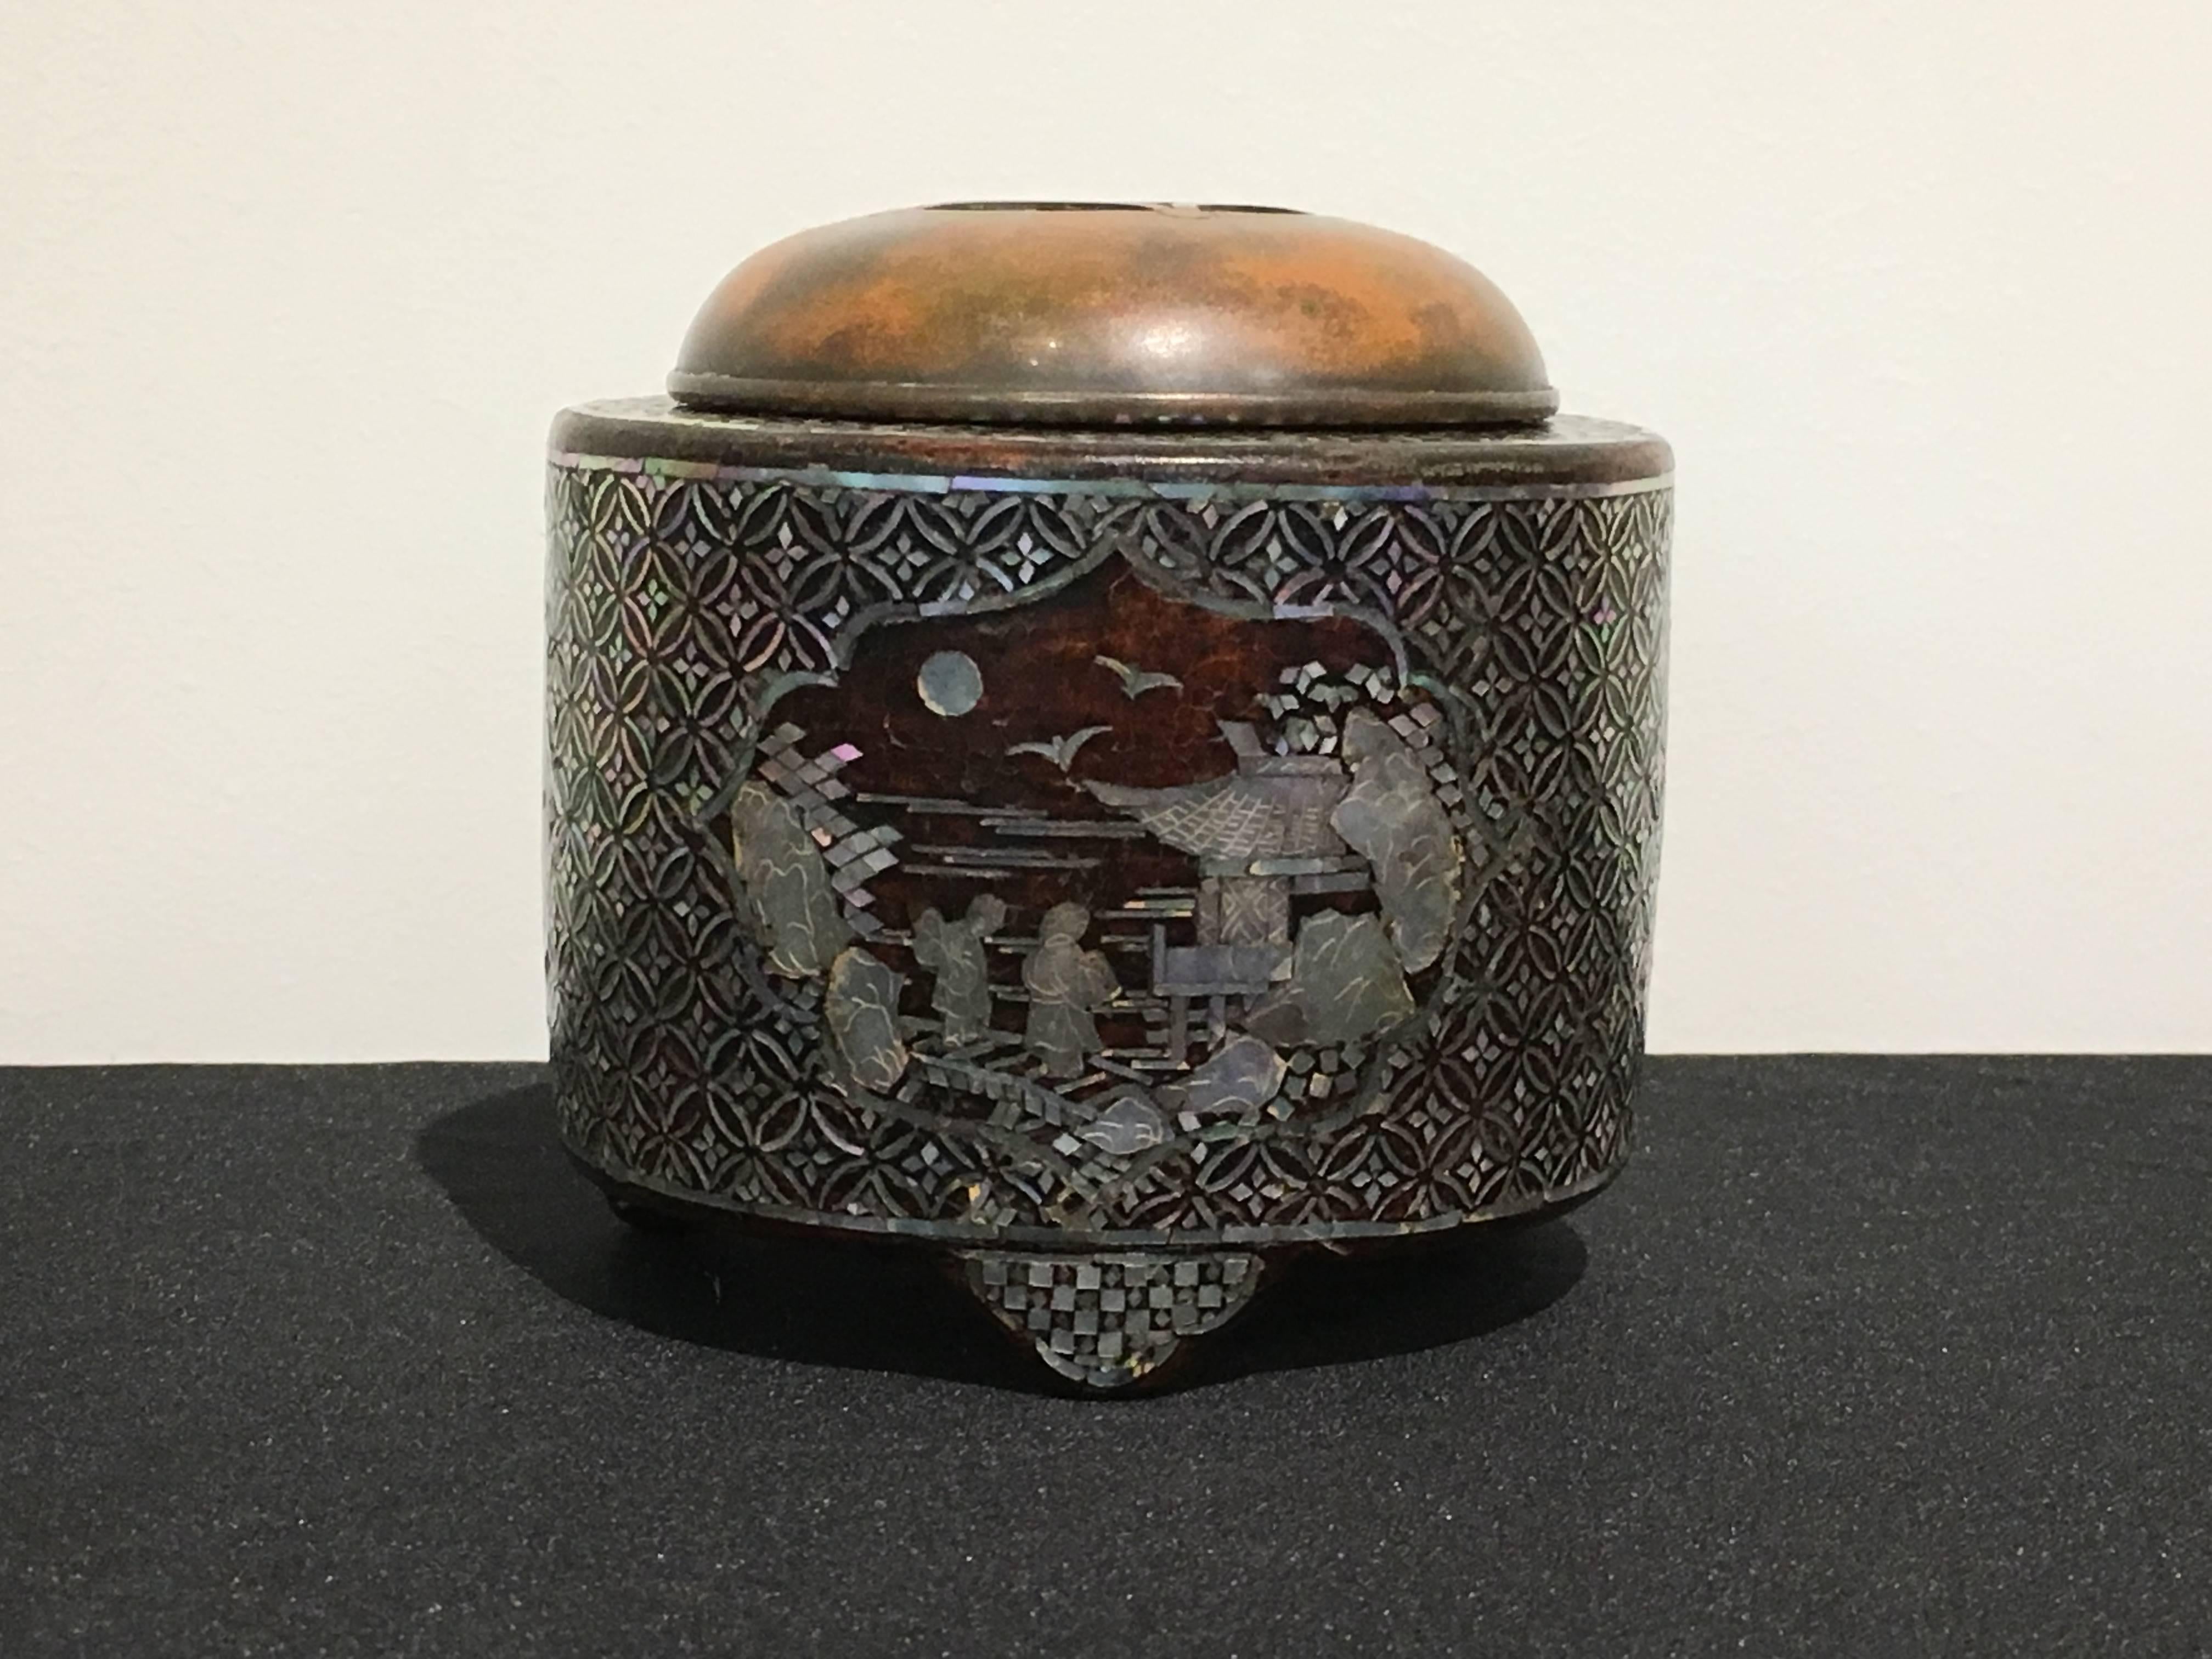 A highly unusual Japanese crackle glazed koro (incense burner or censer), lacquered and inlaid with mother-of-pearl embellishment, signed Gyokusen, Edo Period, early to mid 19th century, Japan.

The crackle glazed stoneware body of cylindrical form